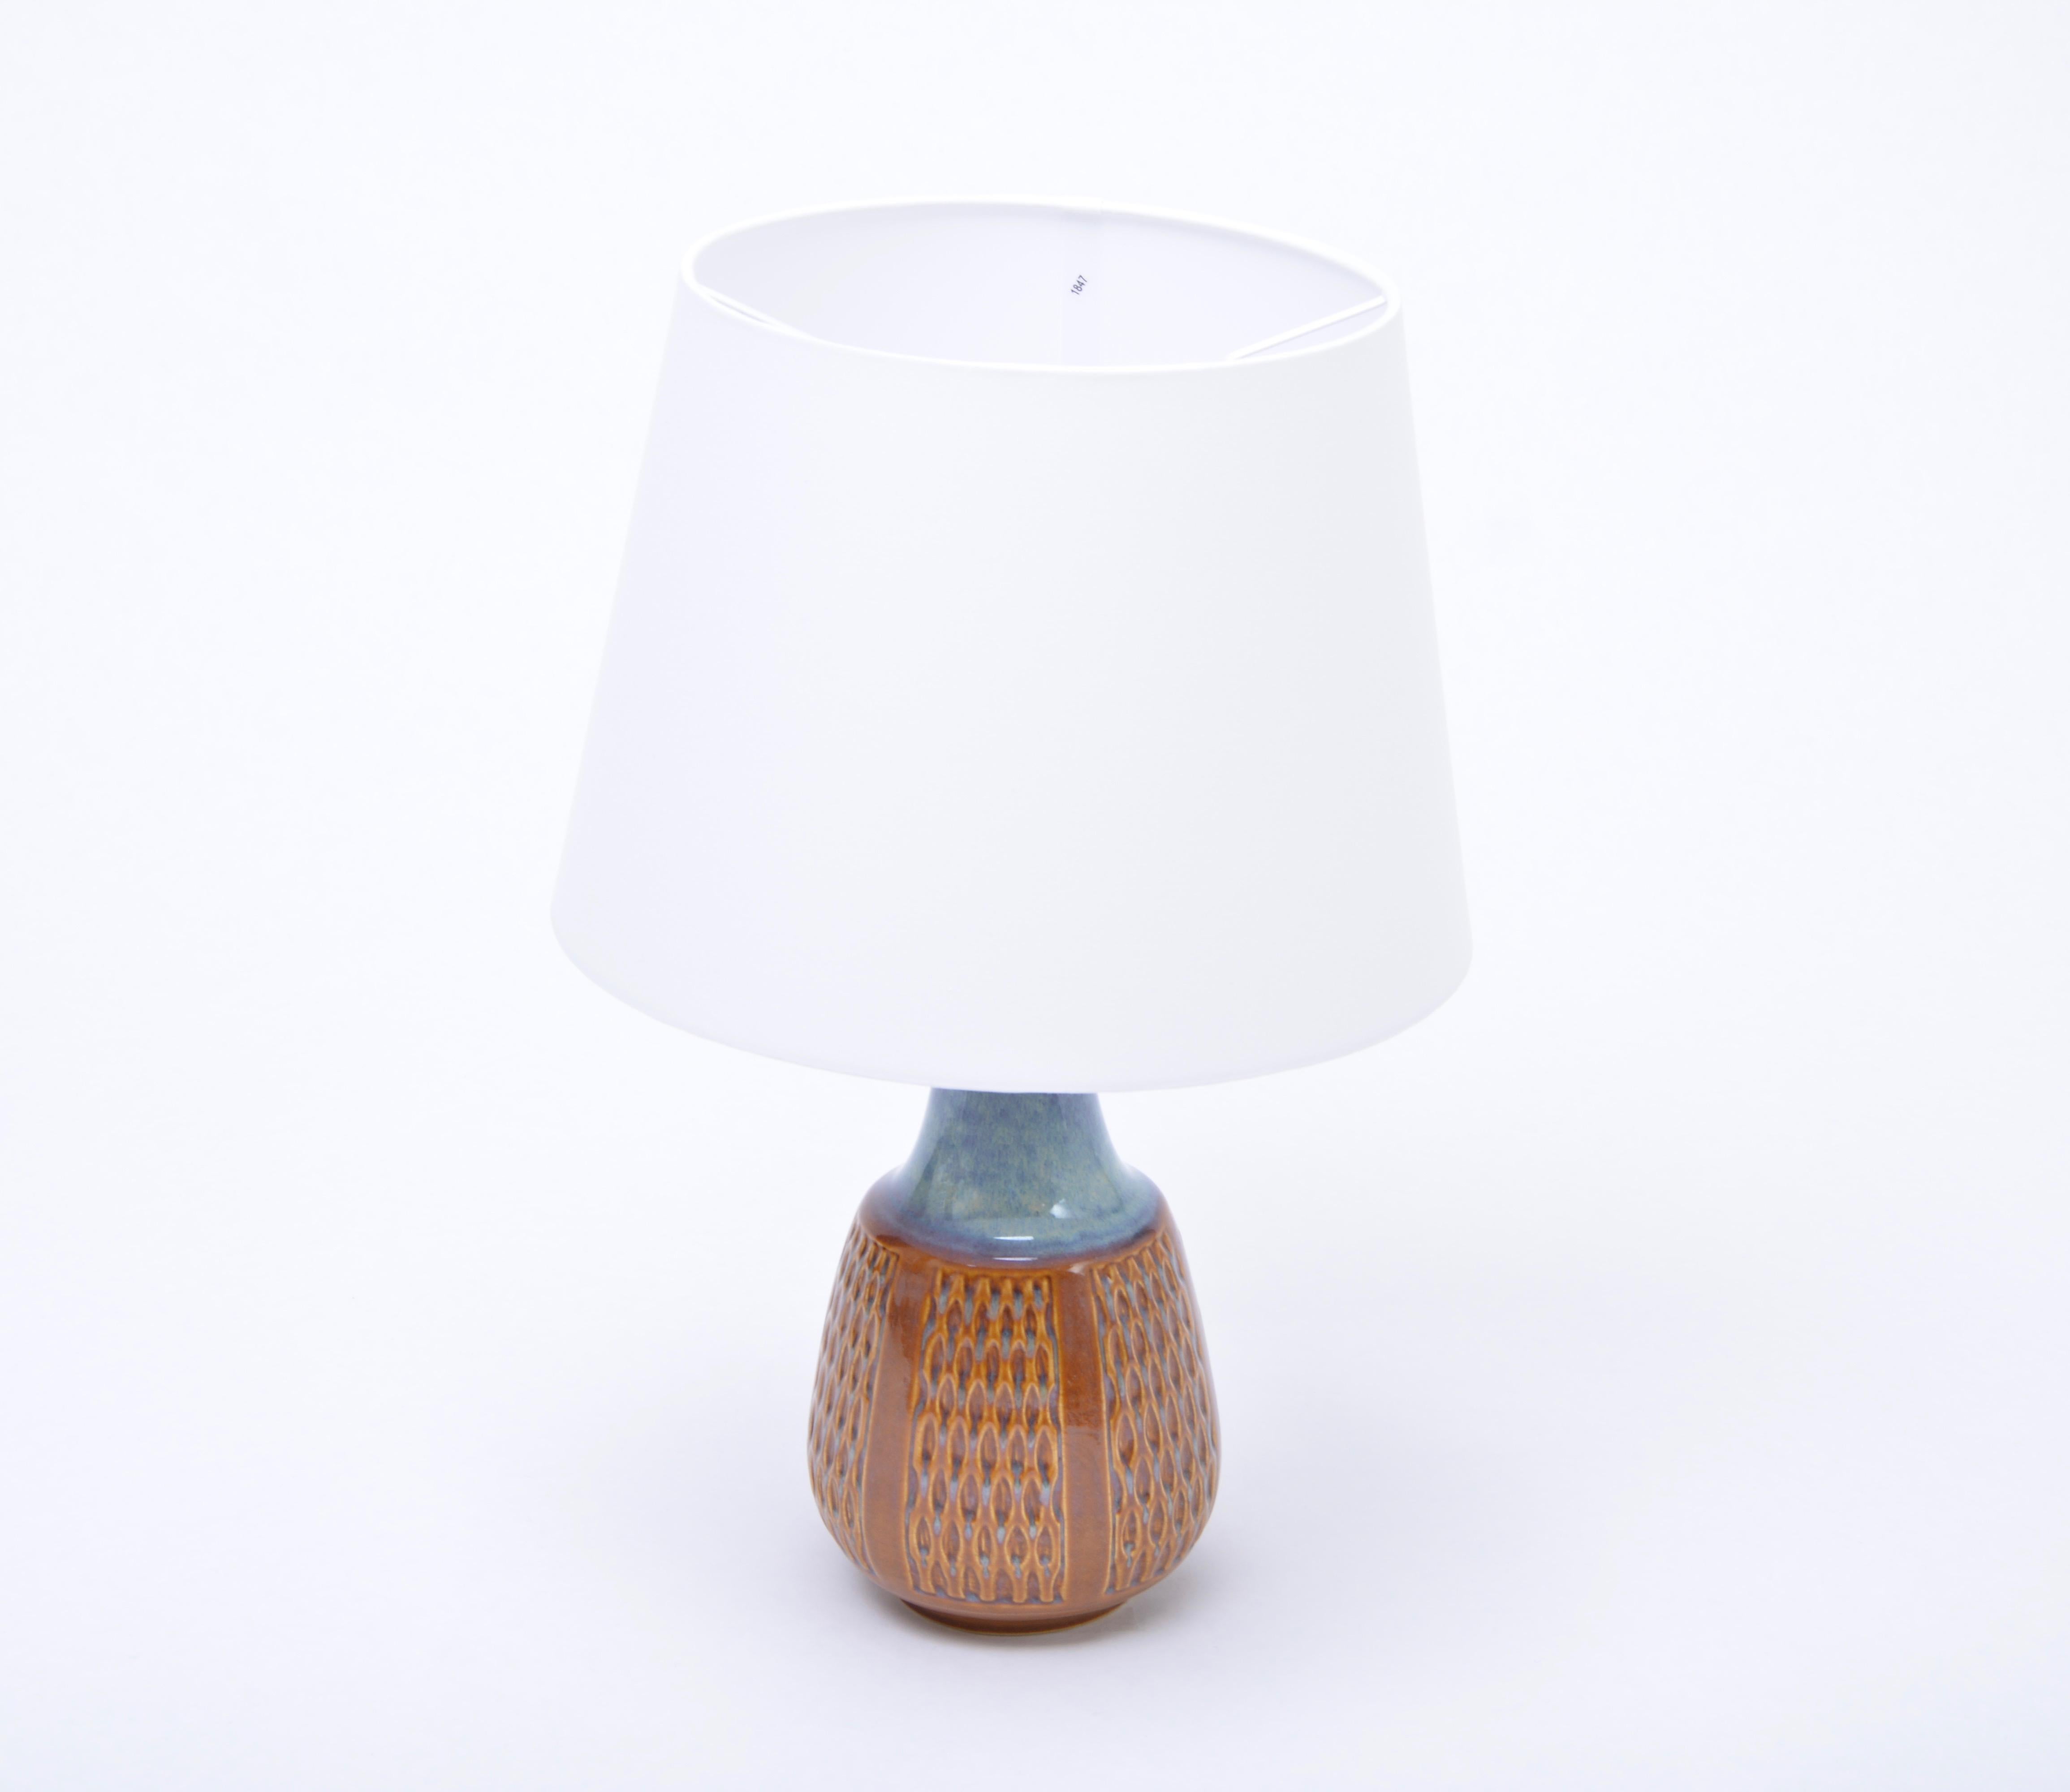 Mid-Century Modern Stoneware table lamp model 1002 by Einar Johansen for Soholm

Table lamp made of stoneware with ceramic glazing in different tones of brown and blue. Graphic pattern to the base of the lamp. Designed by Einar Johansen and produced